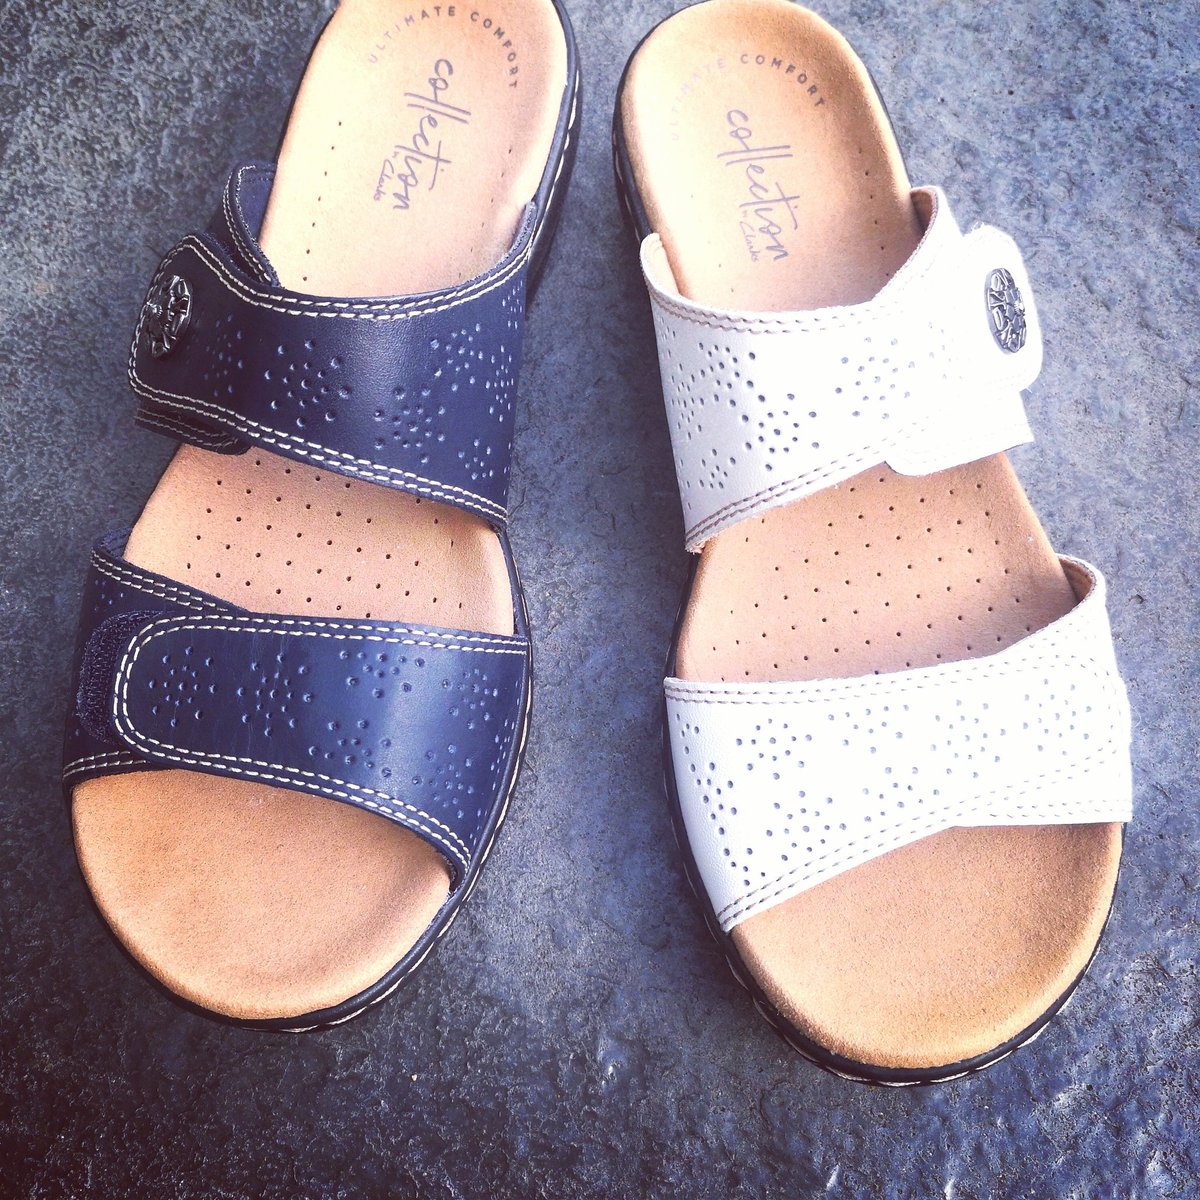 This lovely little slip on by Clarks is fully adjustable. Perfect for a slimmer foot! Light and supportive Ortholite footbeds will keep you going all day long! 💖 #clarks #comfysandals #summerdays #astepaheadfootwear #yyj #yyjlocal #shoplocal #shopuptown #woodgrovecentre